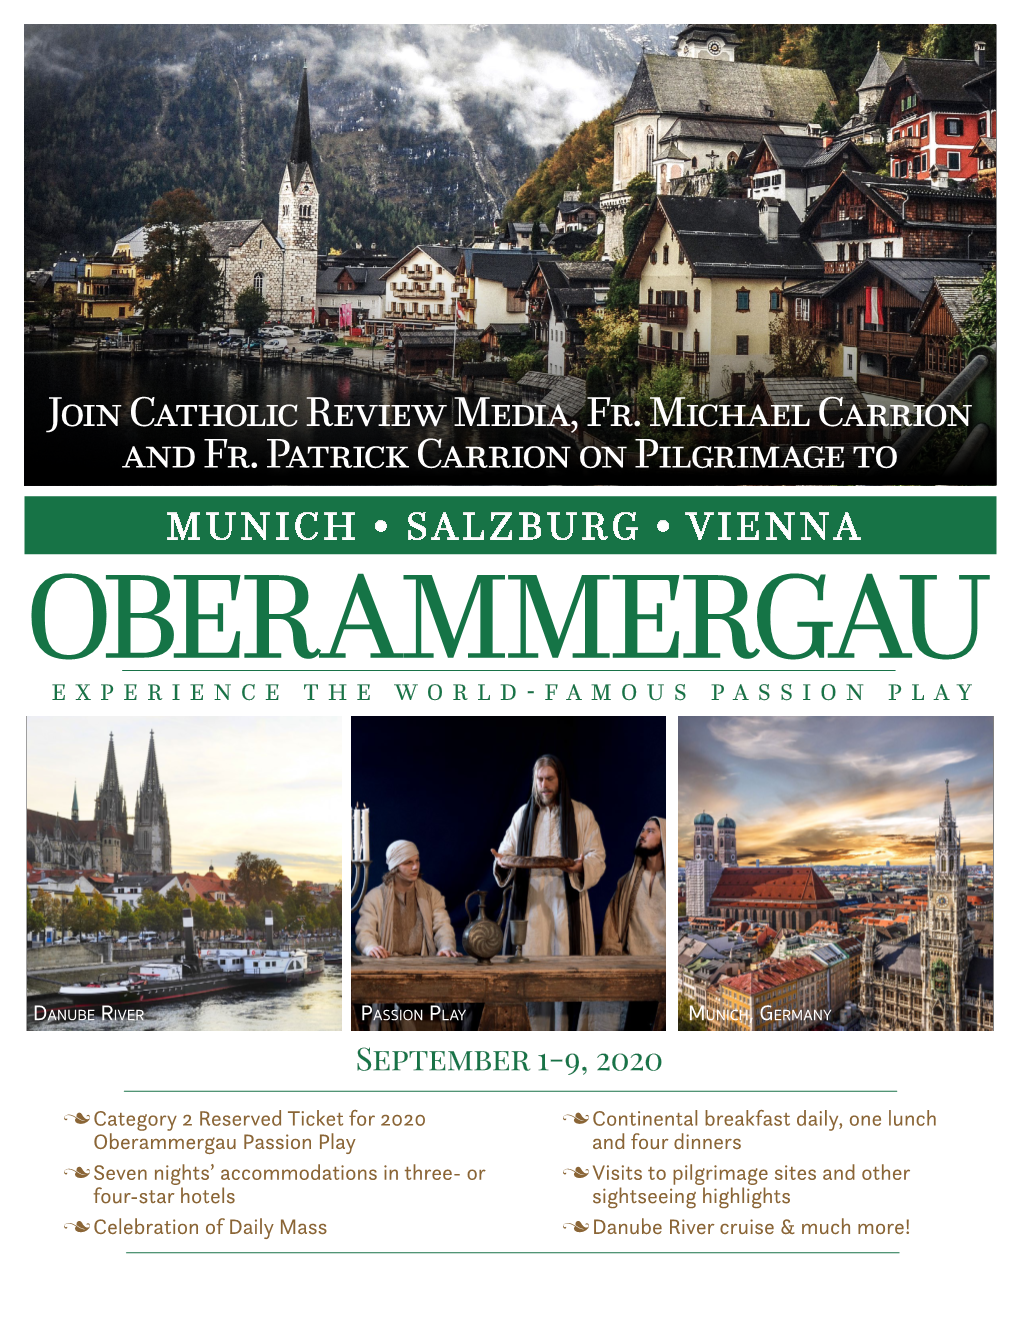 Join Catholic Review Media, Fr. Michael Carrion and Fr. Patrick Carrion on Pilgrimage To